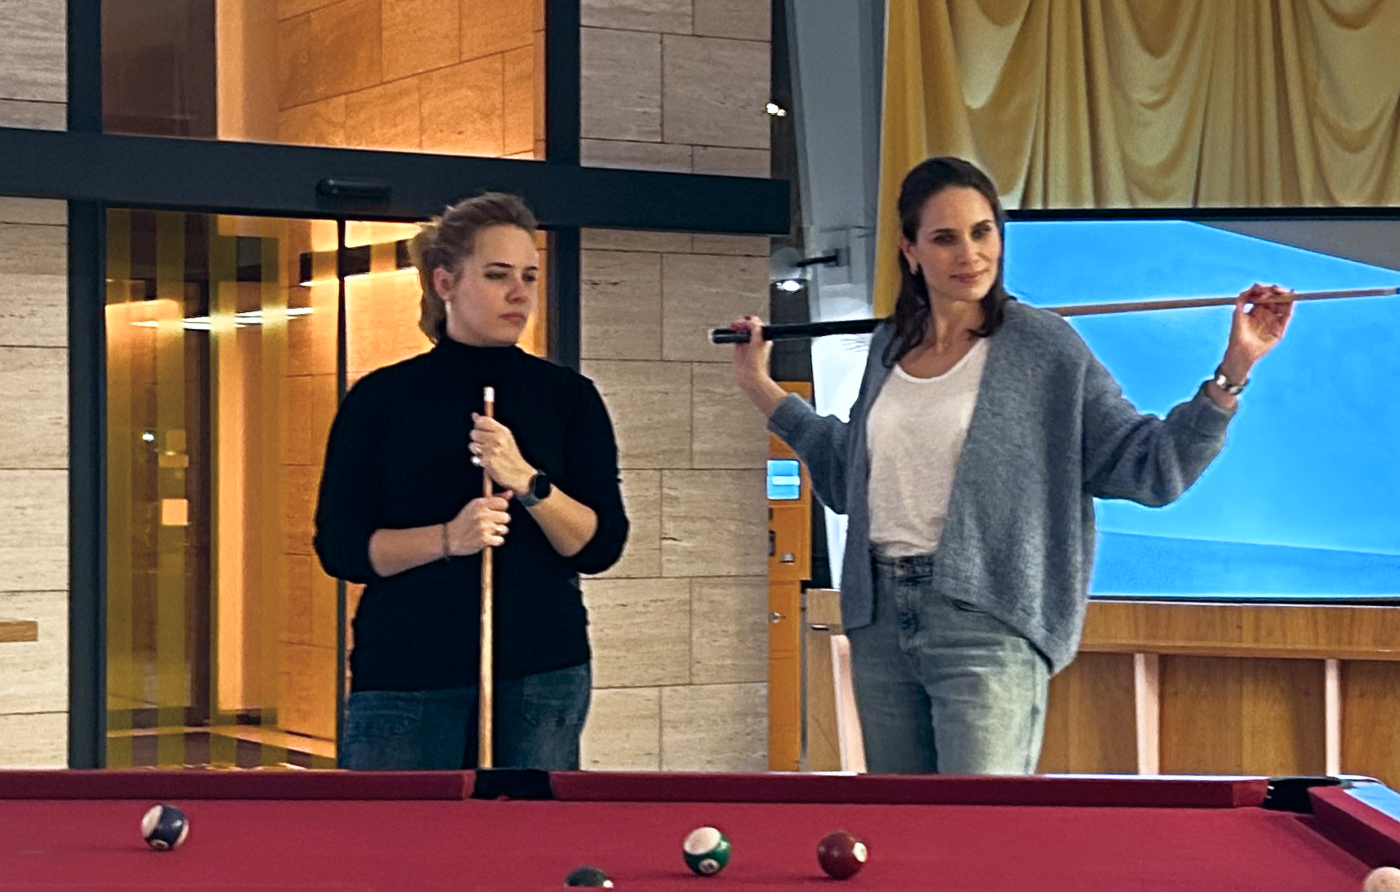 Eleah and Chiara teaming up for a game of pool.